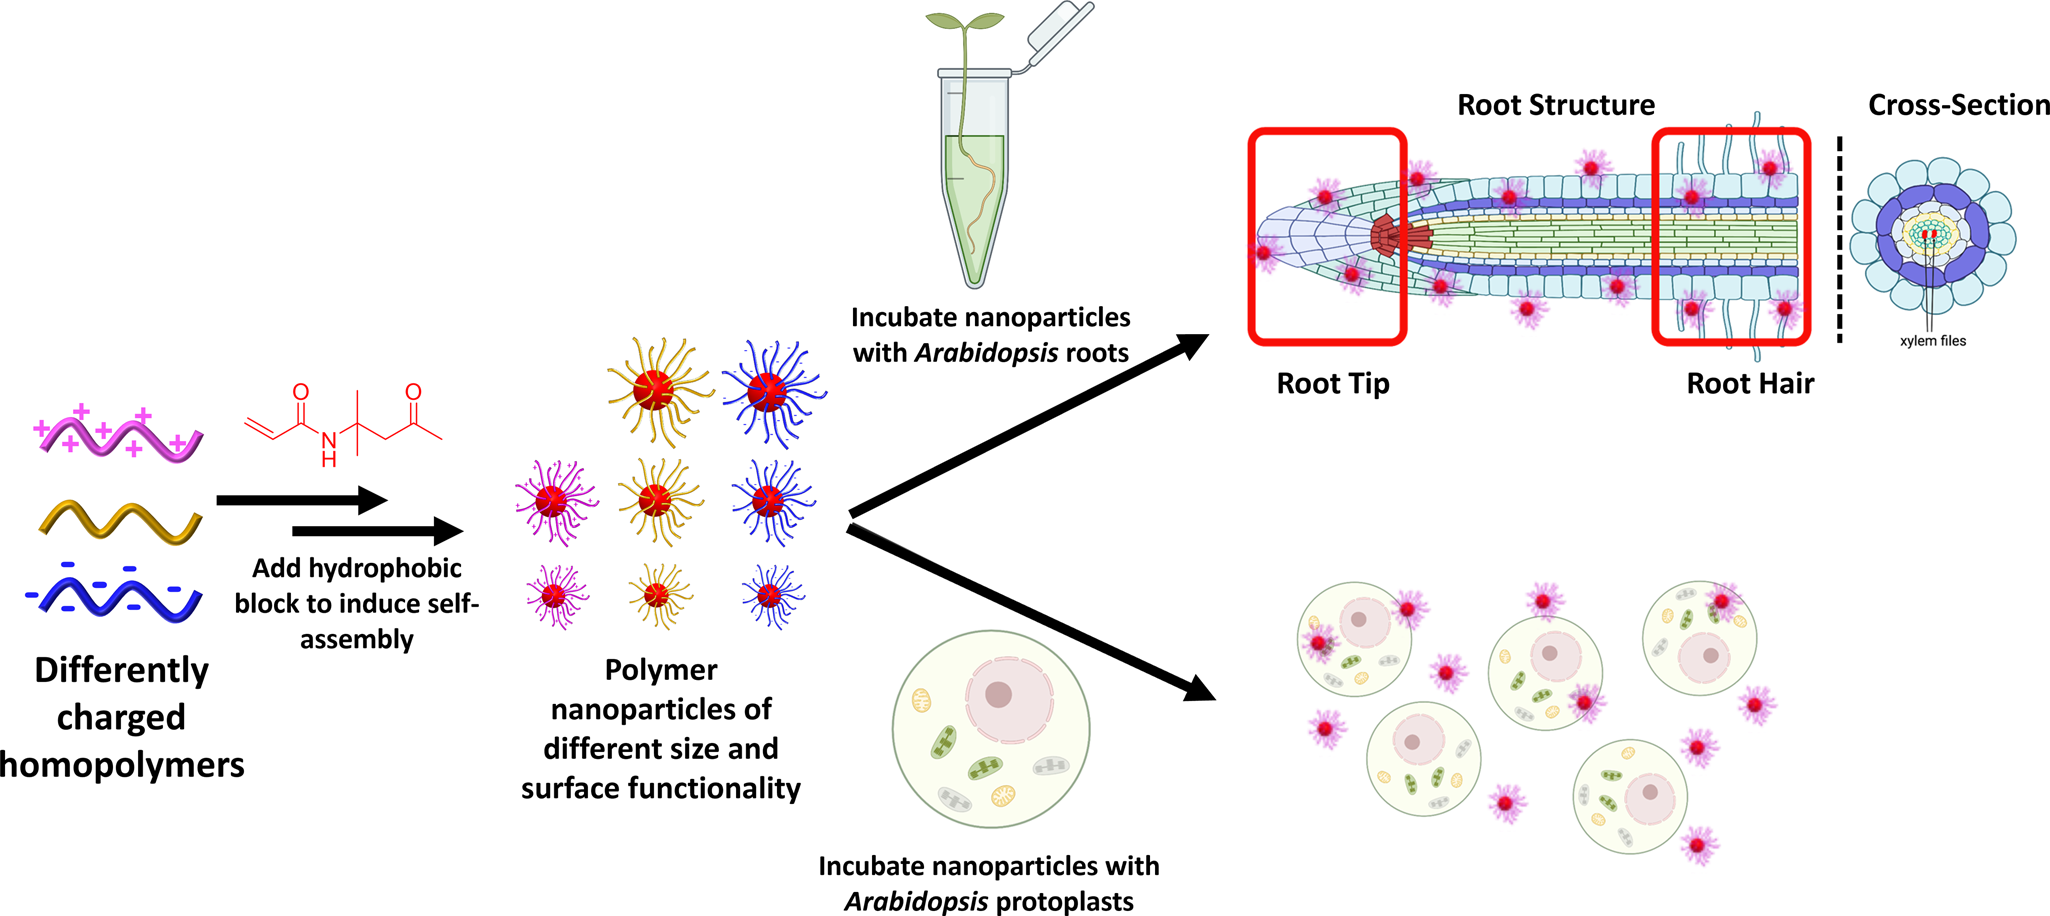 Polymer nanoparticles pass the plant interface | Nature Communications